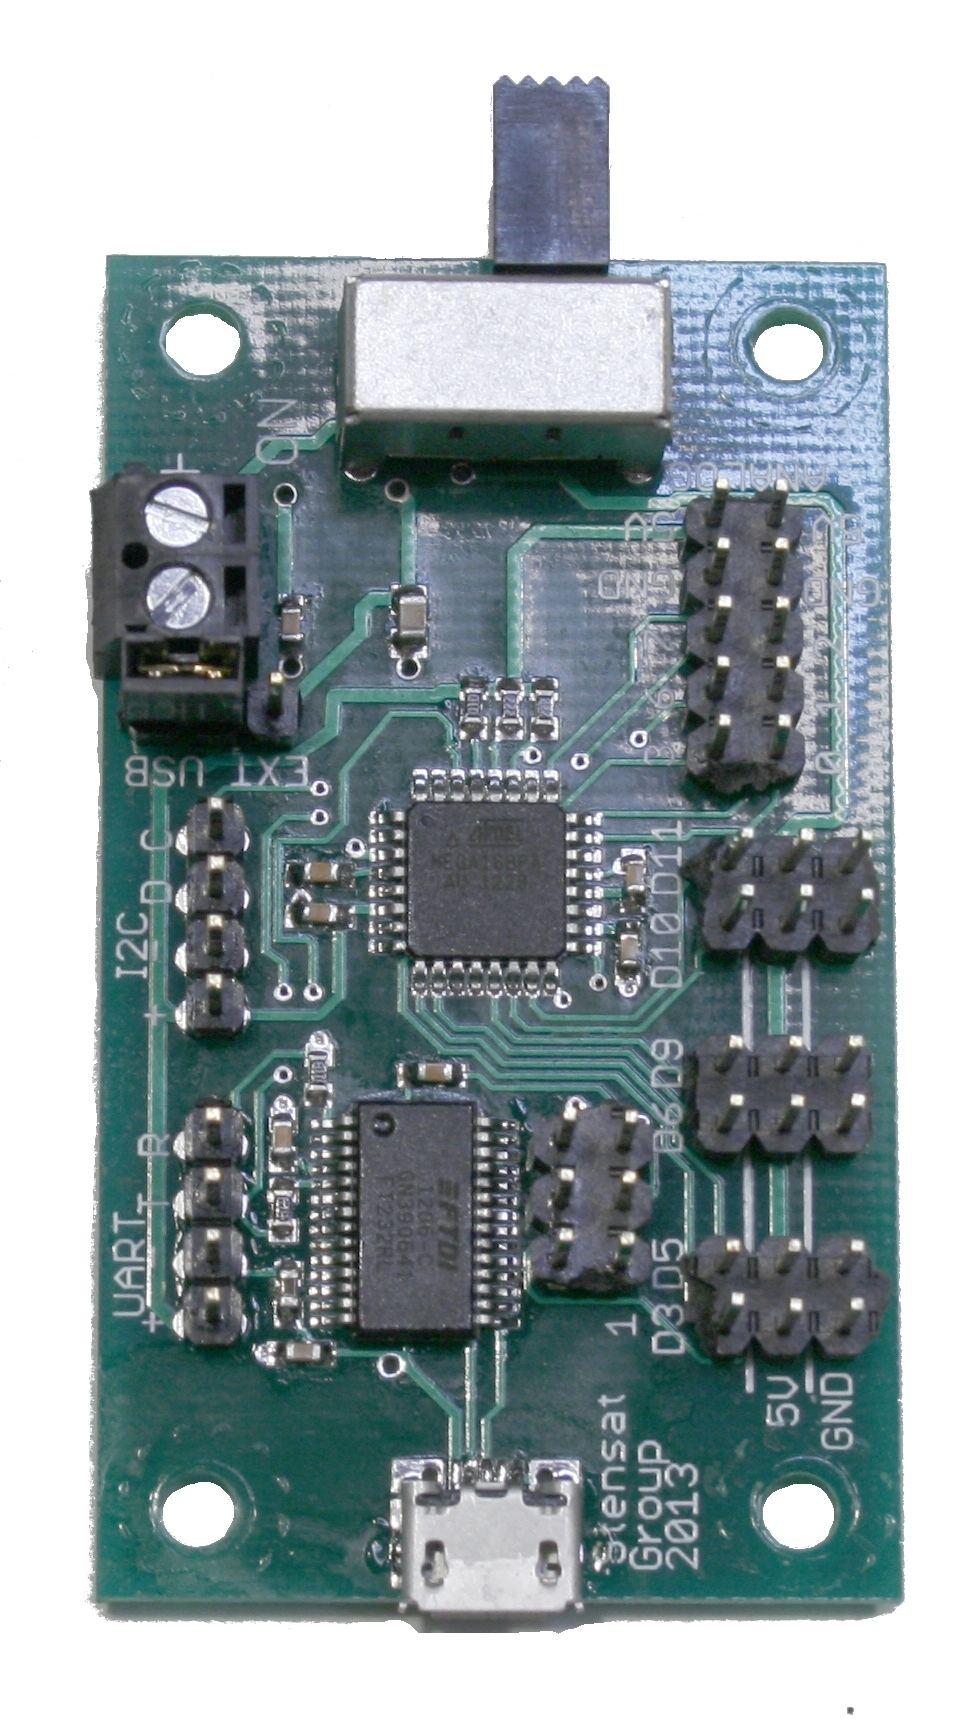 Processor Board Layout Power Switch Power Switch Switches external power on and off When USB selected, switch does not function Micro USB Port Used for programming and UART interfacing with USB host